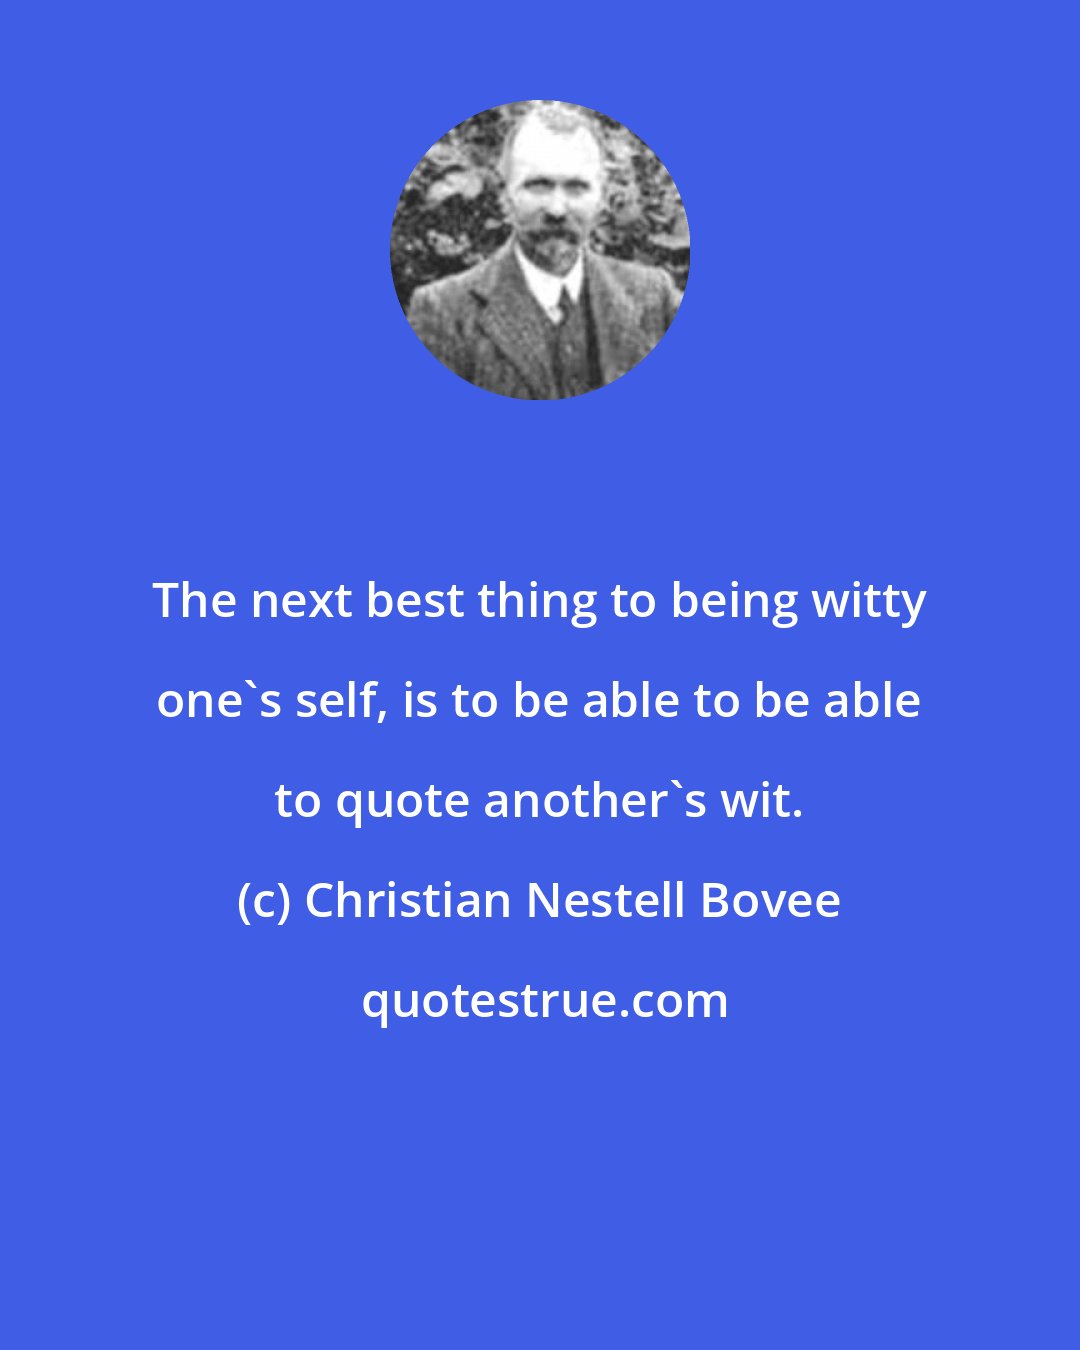 Christian Nestell Bovee: The next best thing to being witty one's self, is to be able to be able to quote another's wit.